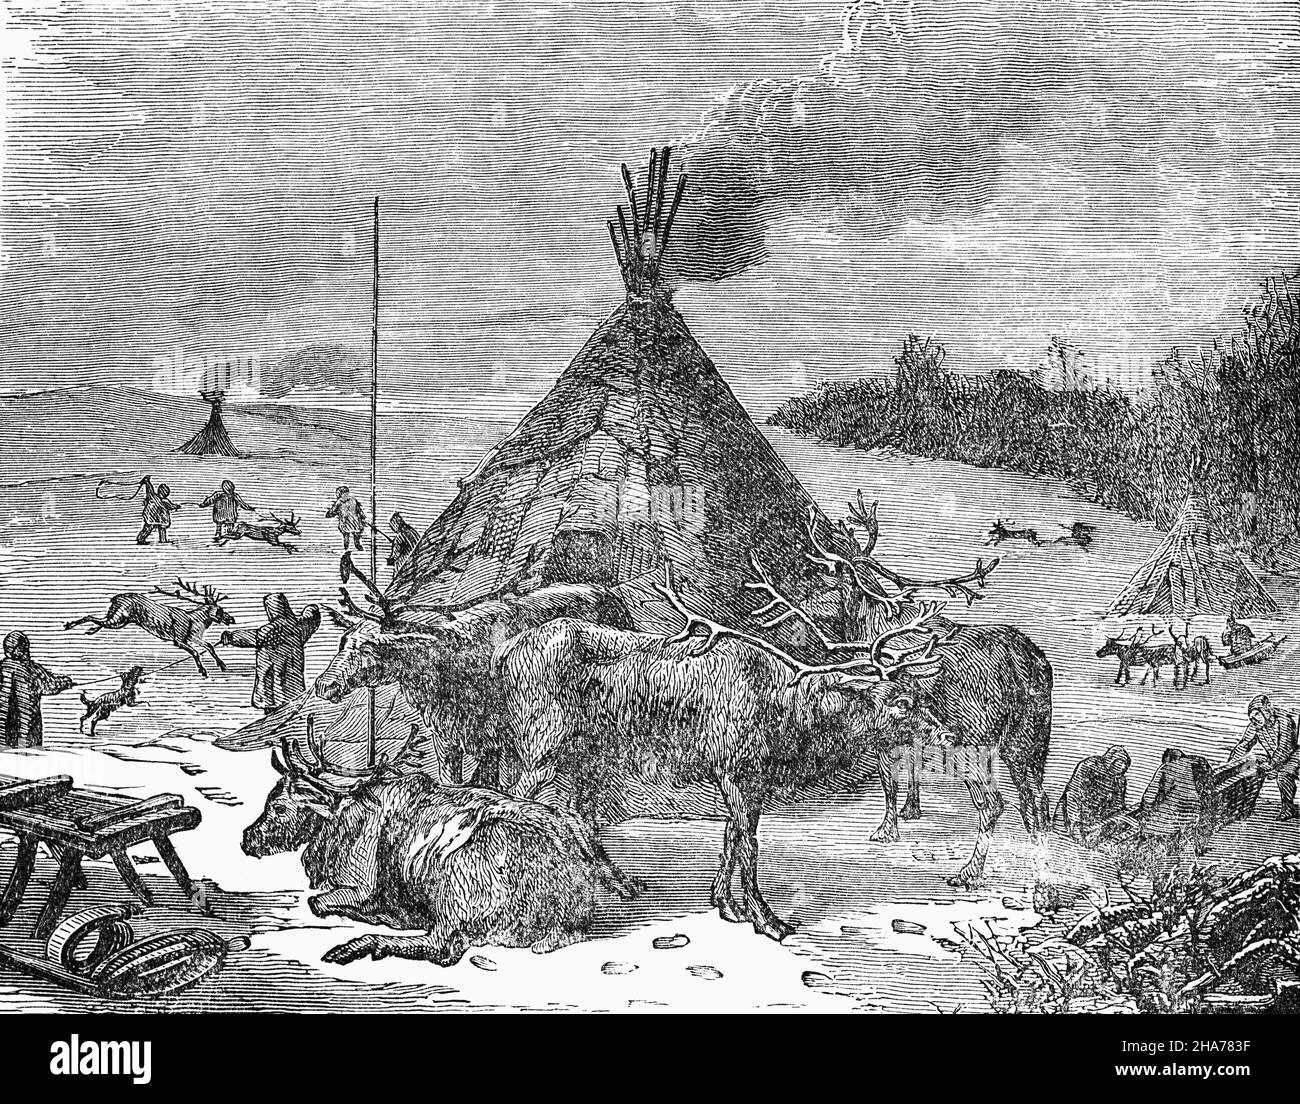 A late 19th Century illustration of a Finnish Sámi settlement of several families called a siida, an ancient community system. They lived in Lavvus, traditional tents featuring a skin wrapped around a cone of supporting poles which have notches and forks to keep them together. Siida members helped each other with the management of reindeer herds used for transport, milk and meat production, however, skins, bones, and horns are important raw materials for making clothes and handicrafts. Stock Photo